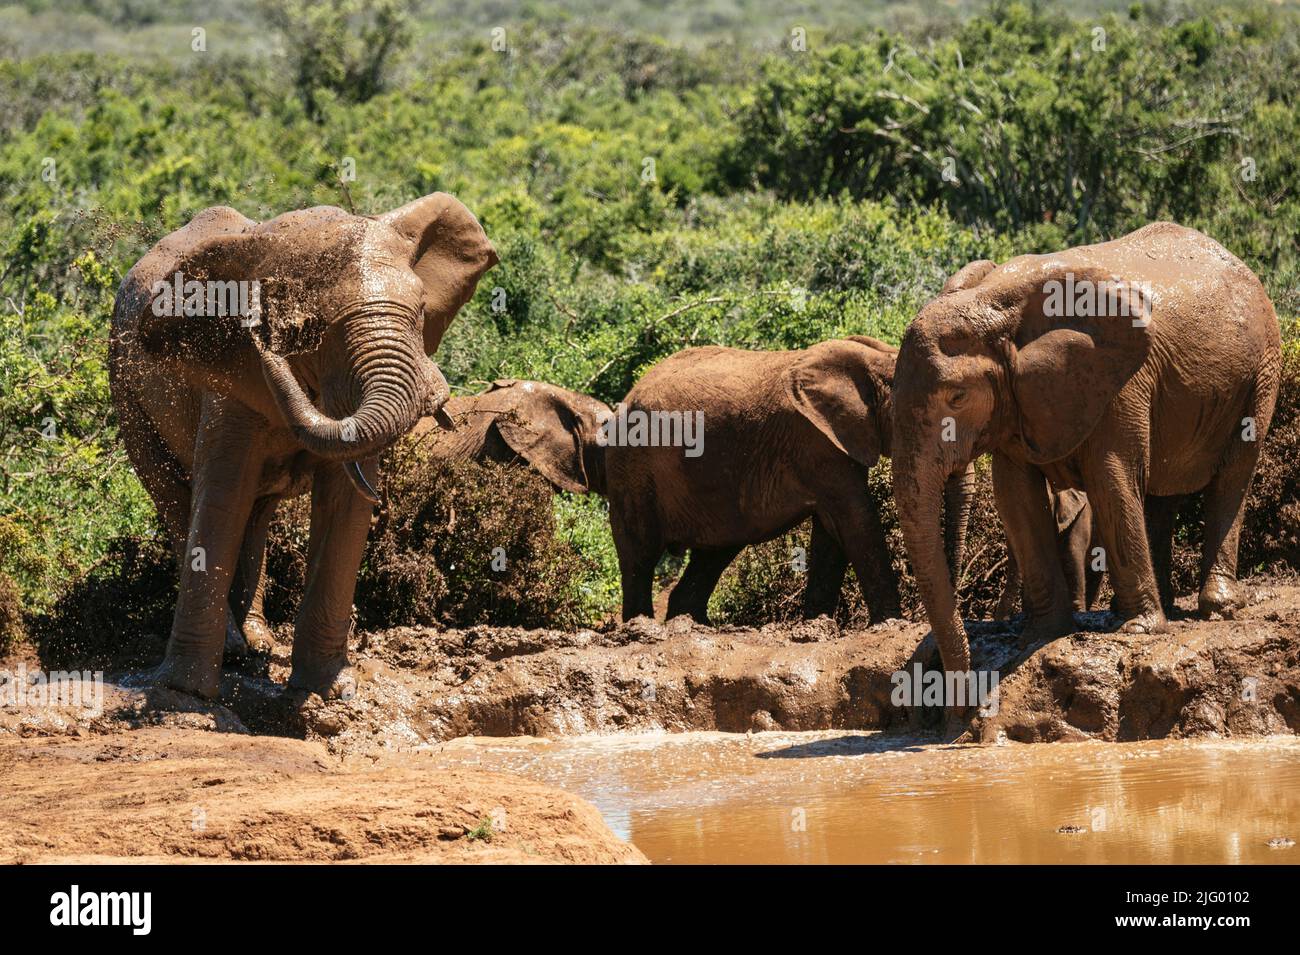 African Elephants, Addo Elephant National Park, Eastern Cape, South Africa, Africa Stock Photo